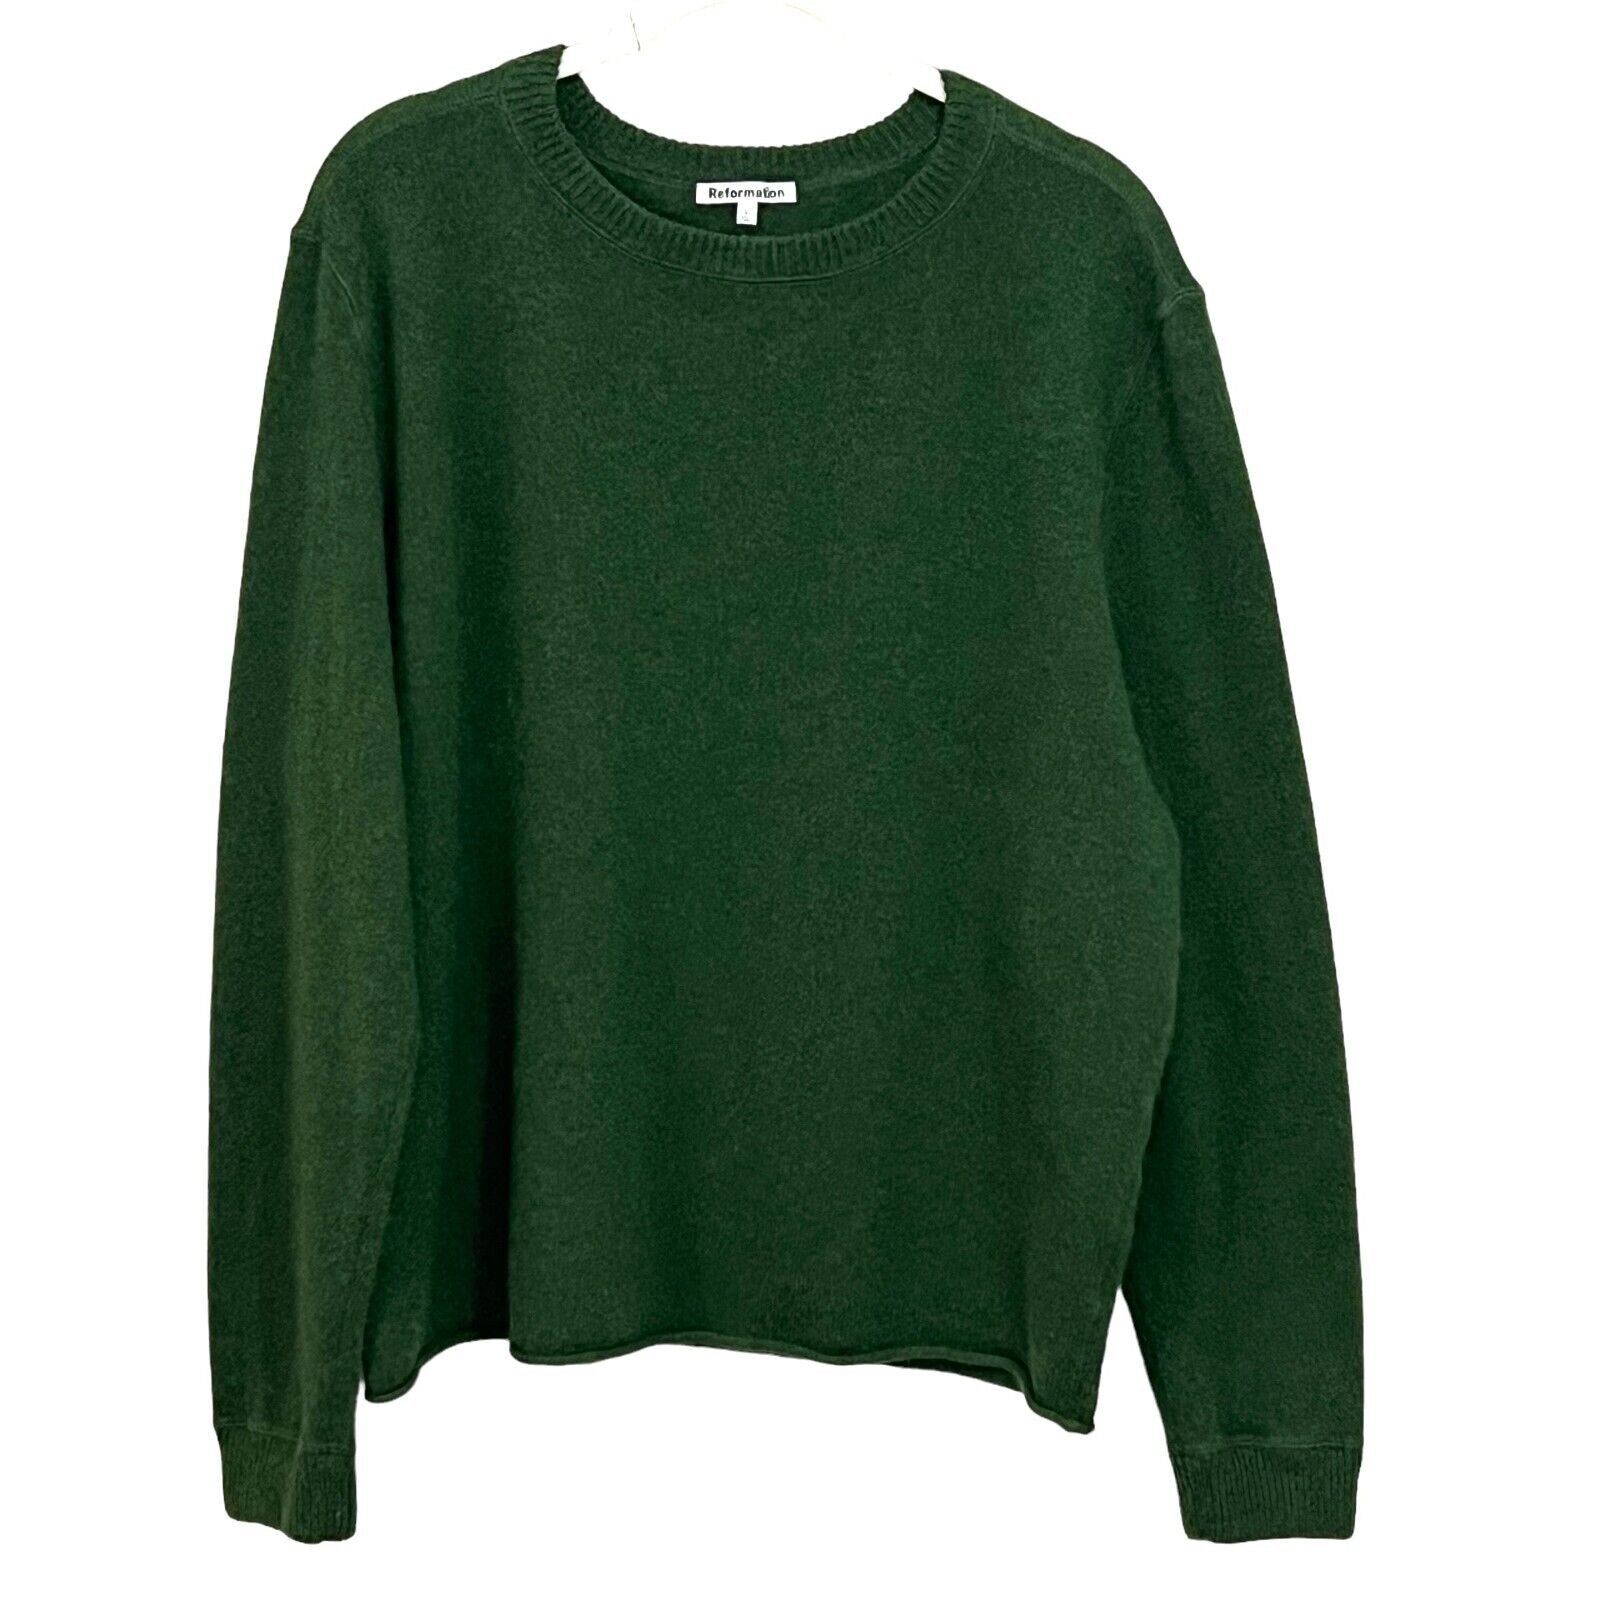 Reformation Green Cashmere Sweater Size Large